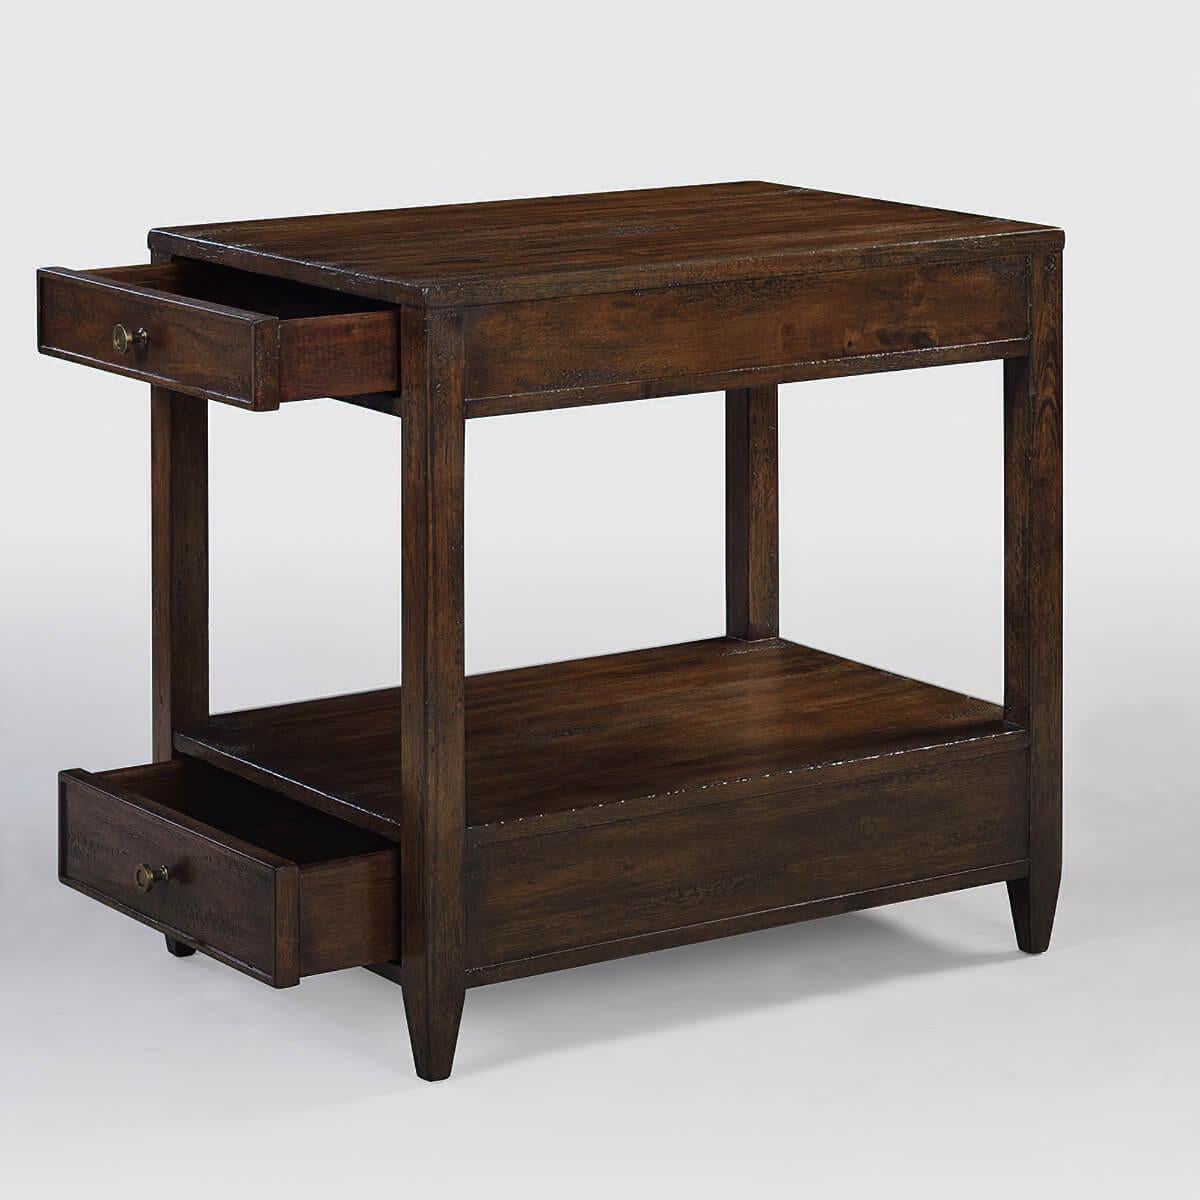 Classic narrow rectangle side table with two drawers, brass hardware, and tapered feet, with a “country” dark mahogany tone with natural highlights, a hand-rubbed and distressed antiqued finish.

Dimensions: 18